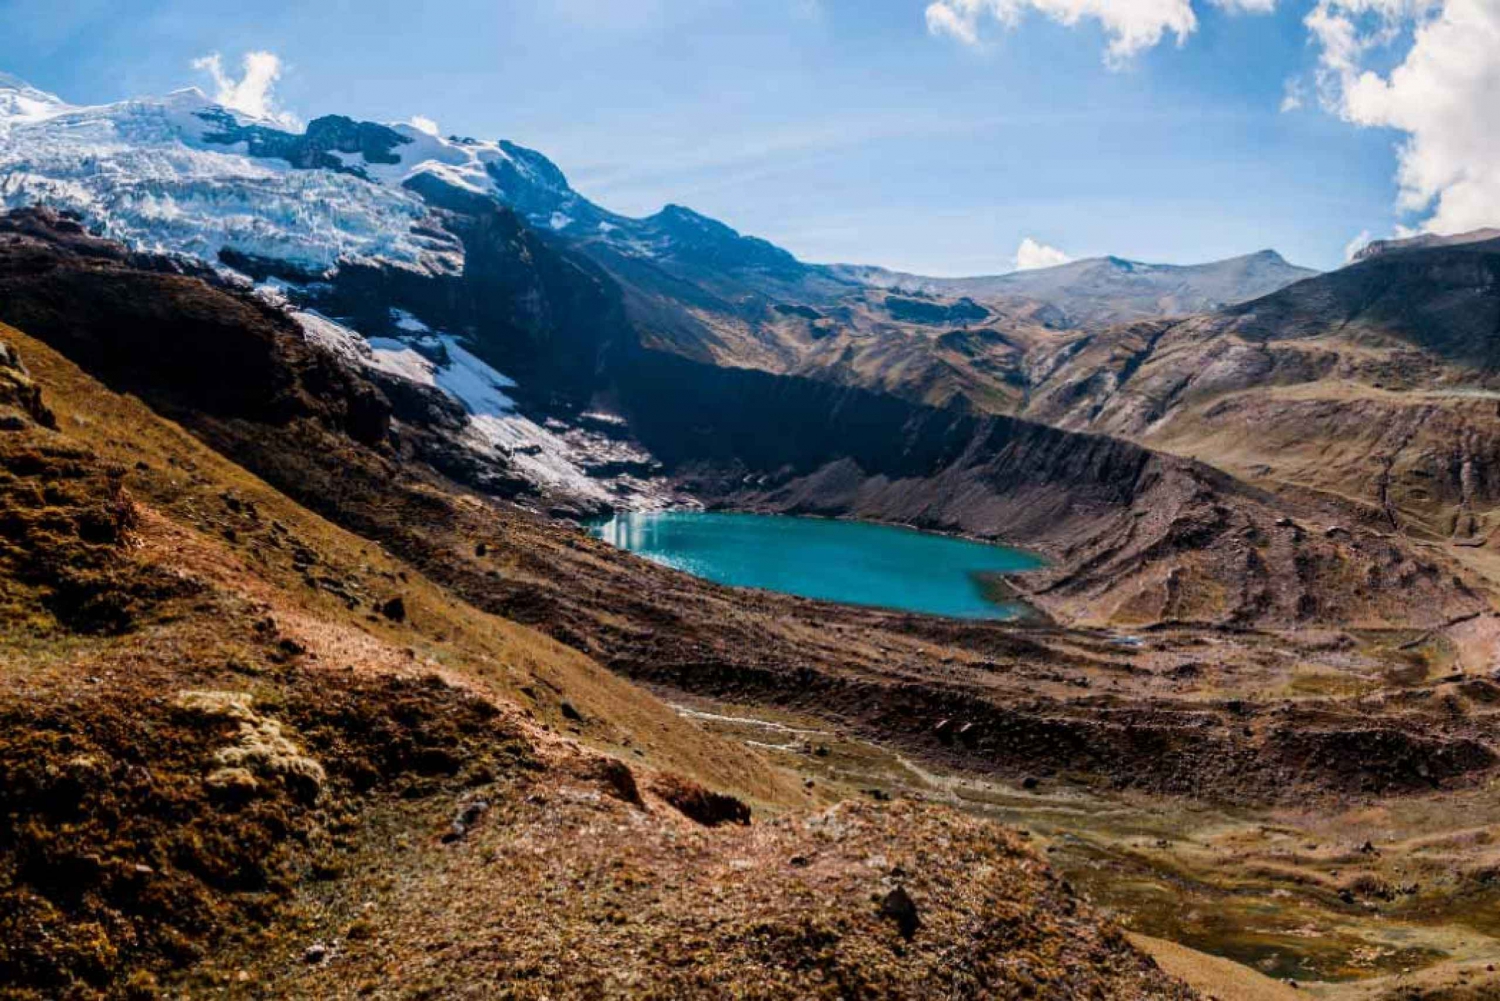 Cusco: 7 Lagoons of Ausangate Hiking Day Trip with Lunch